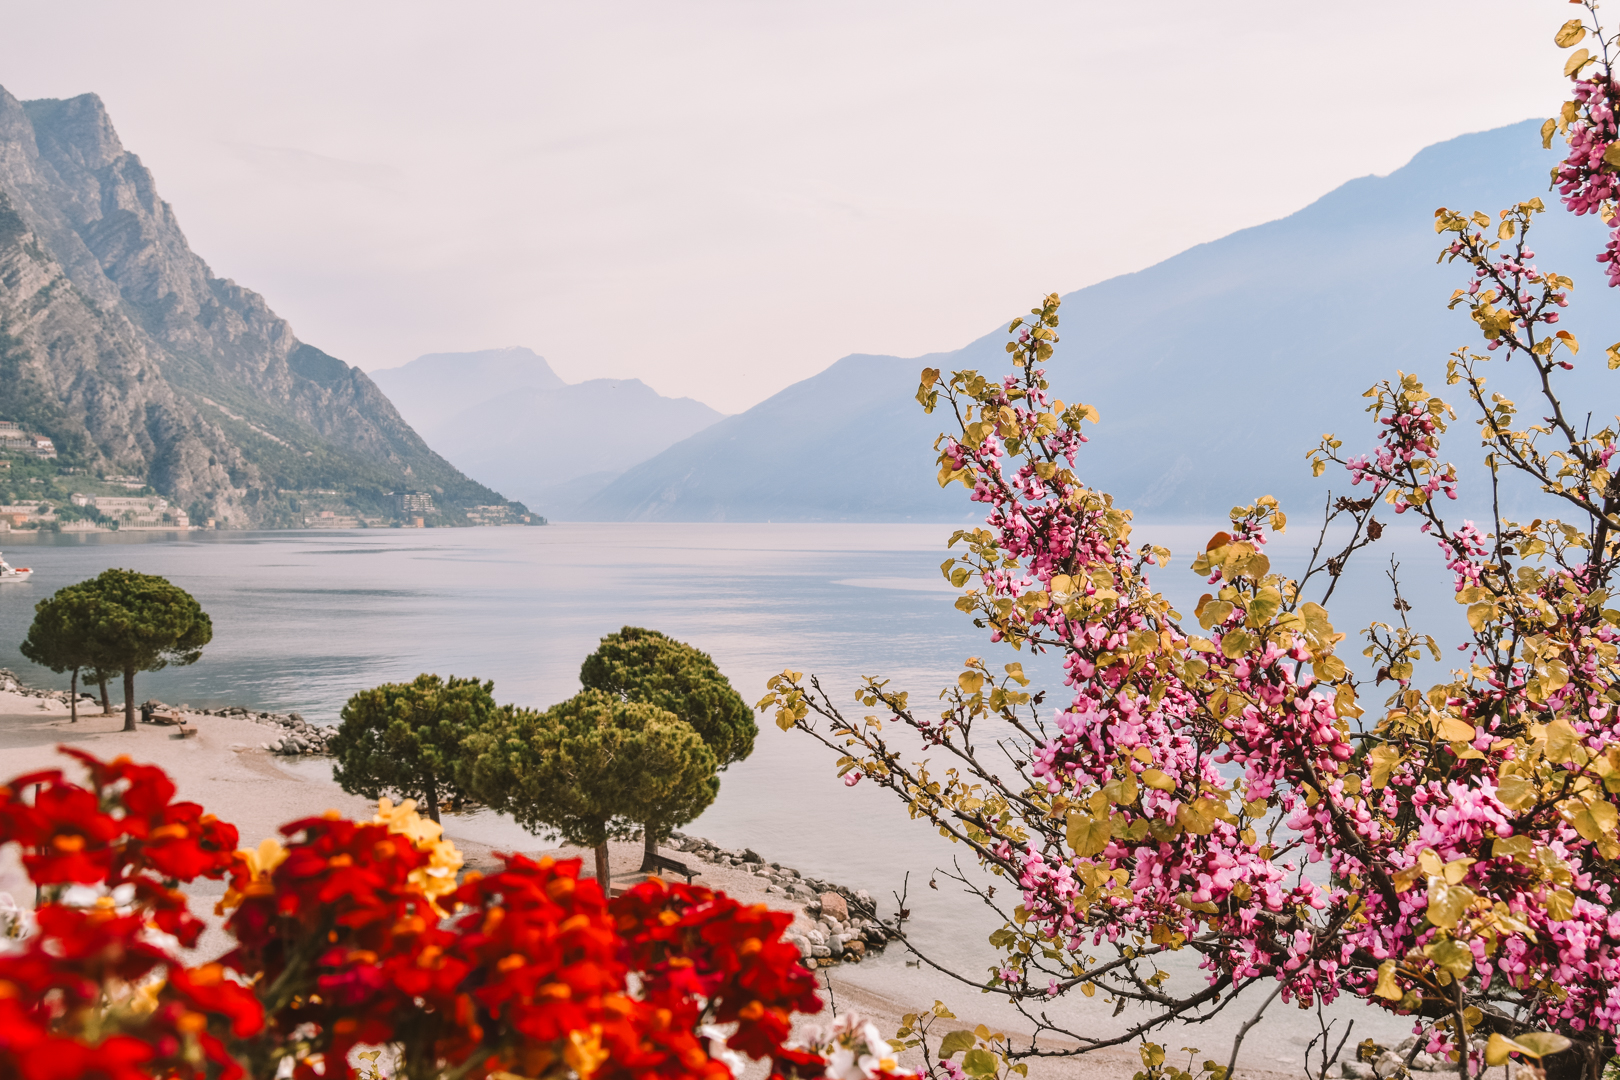 The white pebble beach in Limone sul Garda surrounded by pink flowers